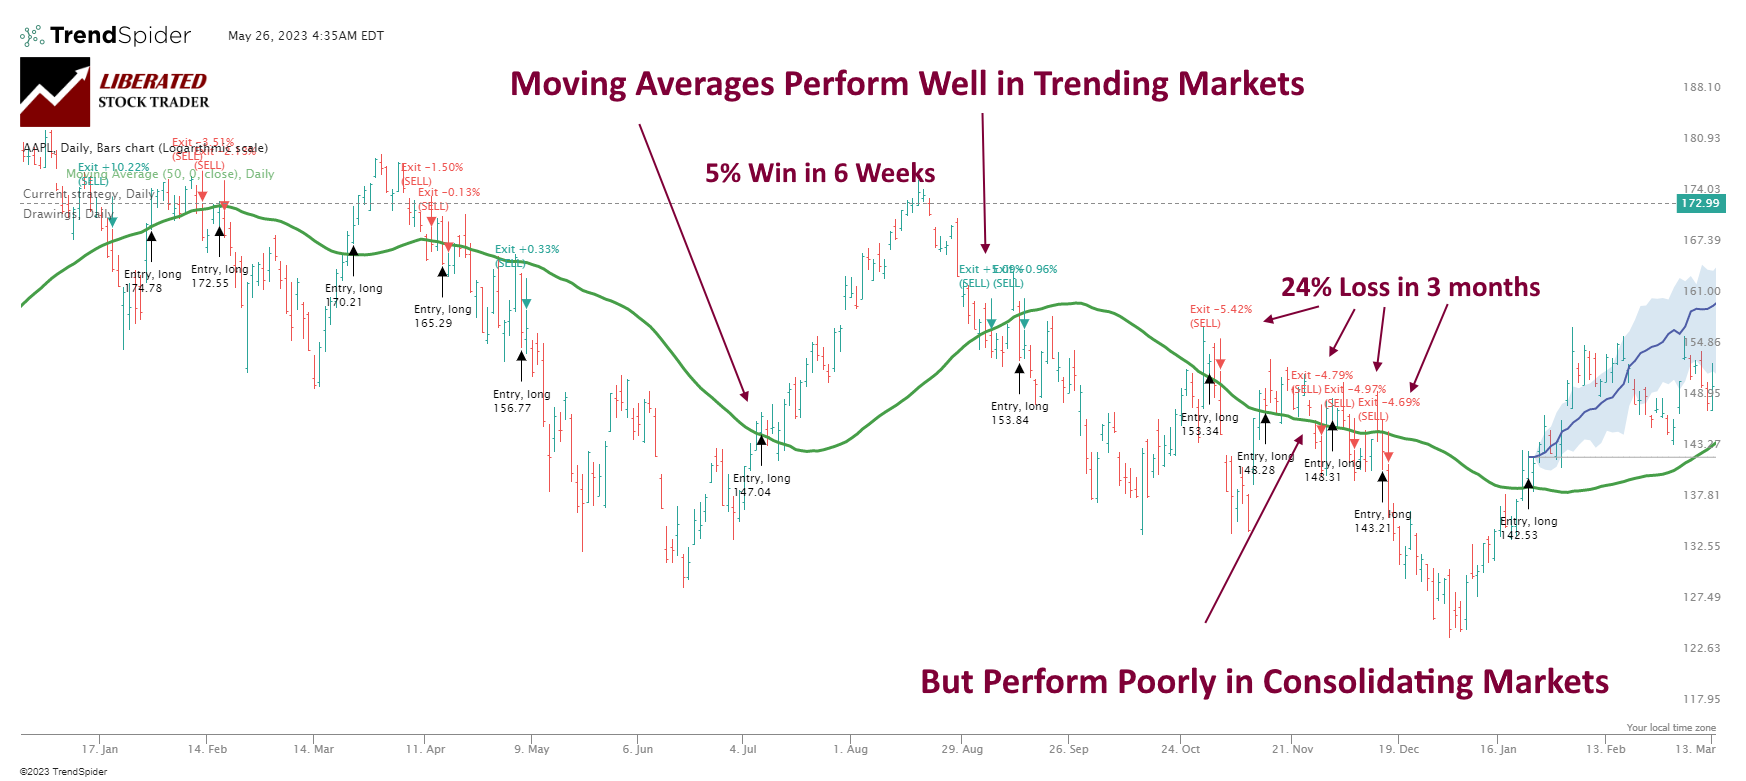 The main problem with moving averages is the poor performance in sideways consolidating markets.